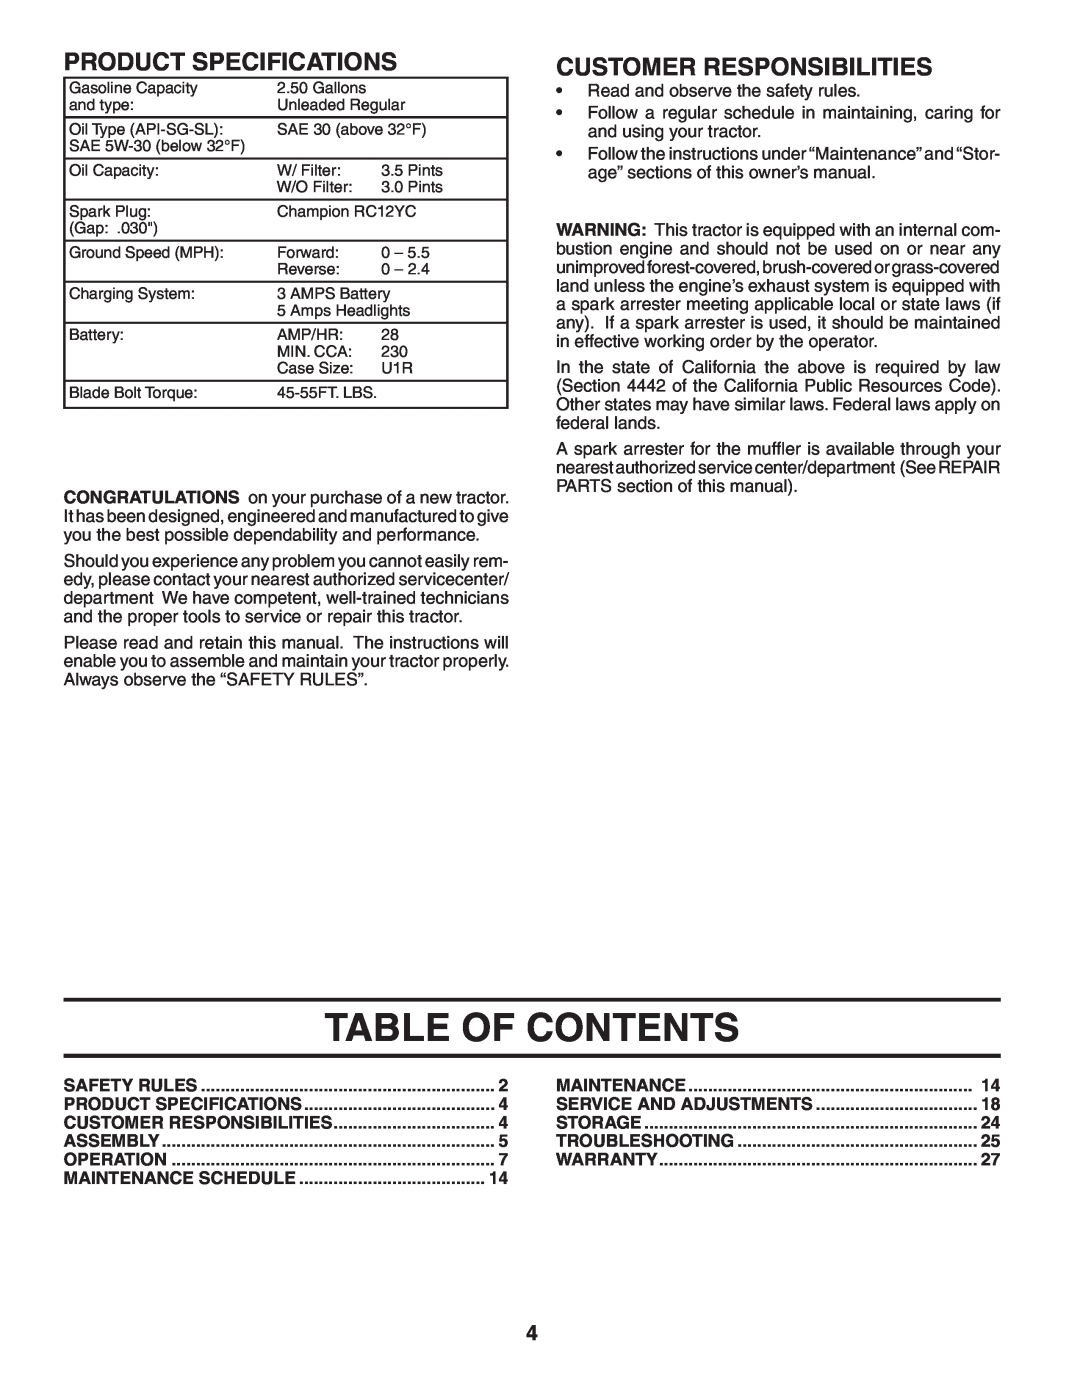 Poulan 403808 manual Table Of Contents, Product Specifications, Customer Responsibilities 